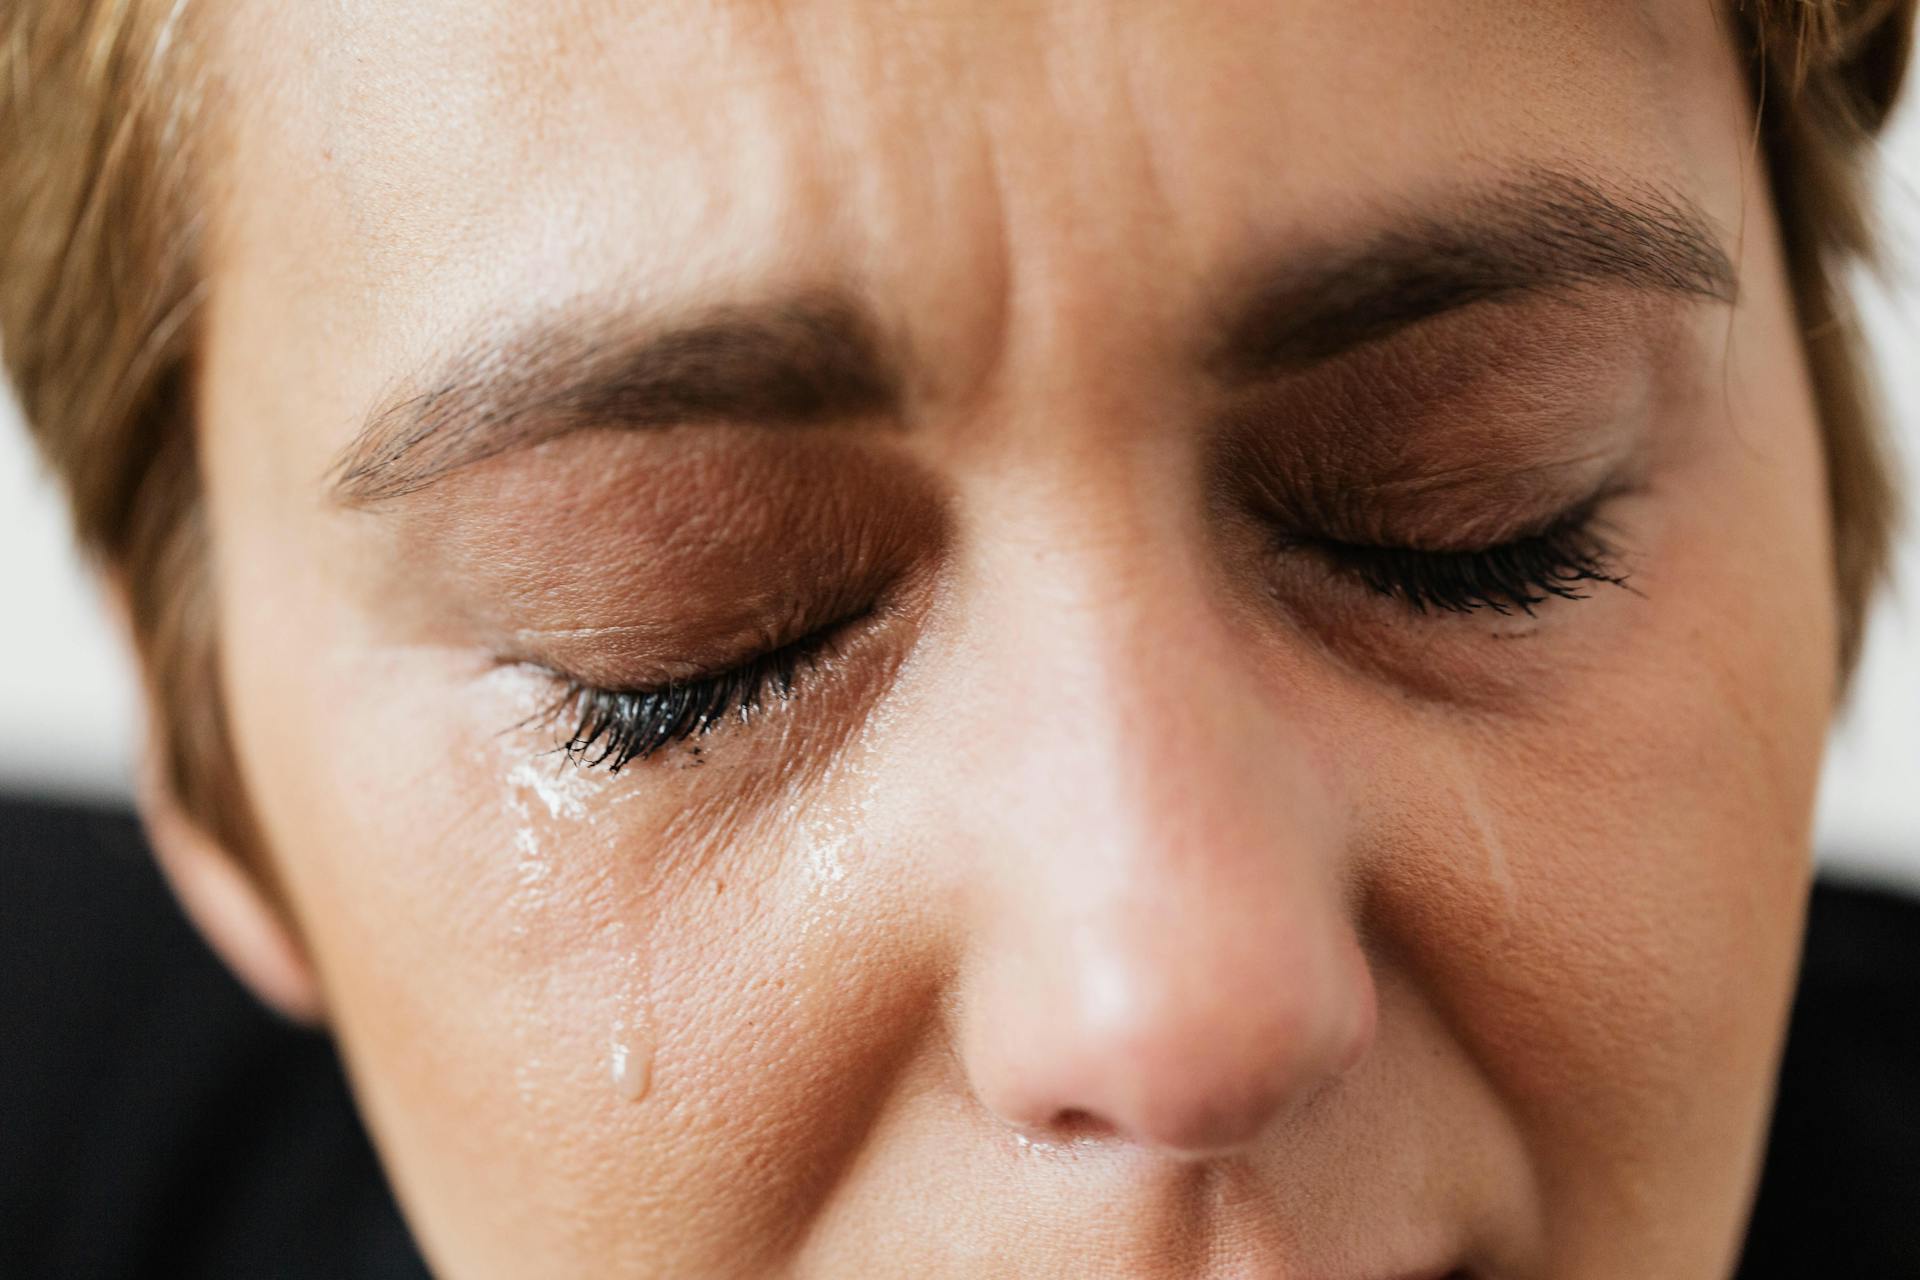 A crying woman. | Source: Pexels